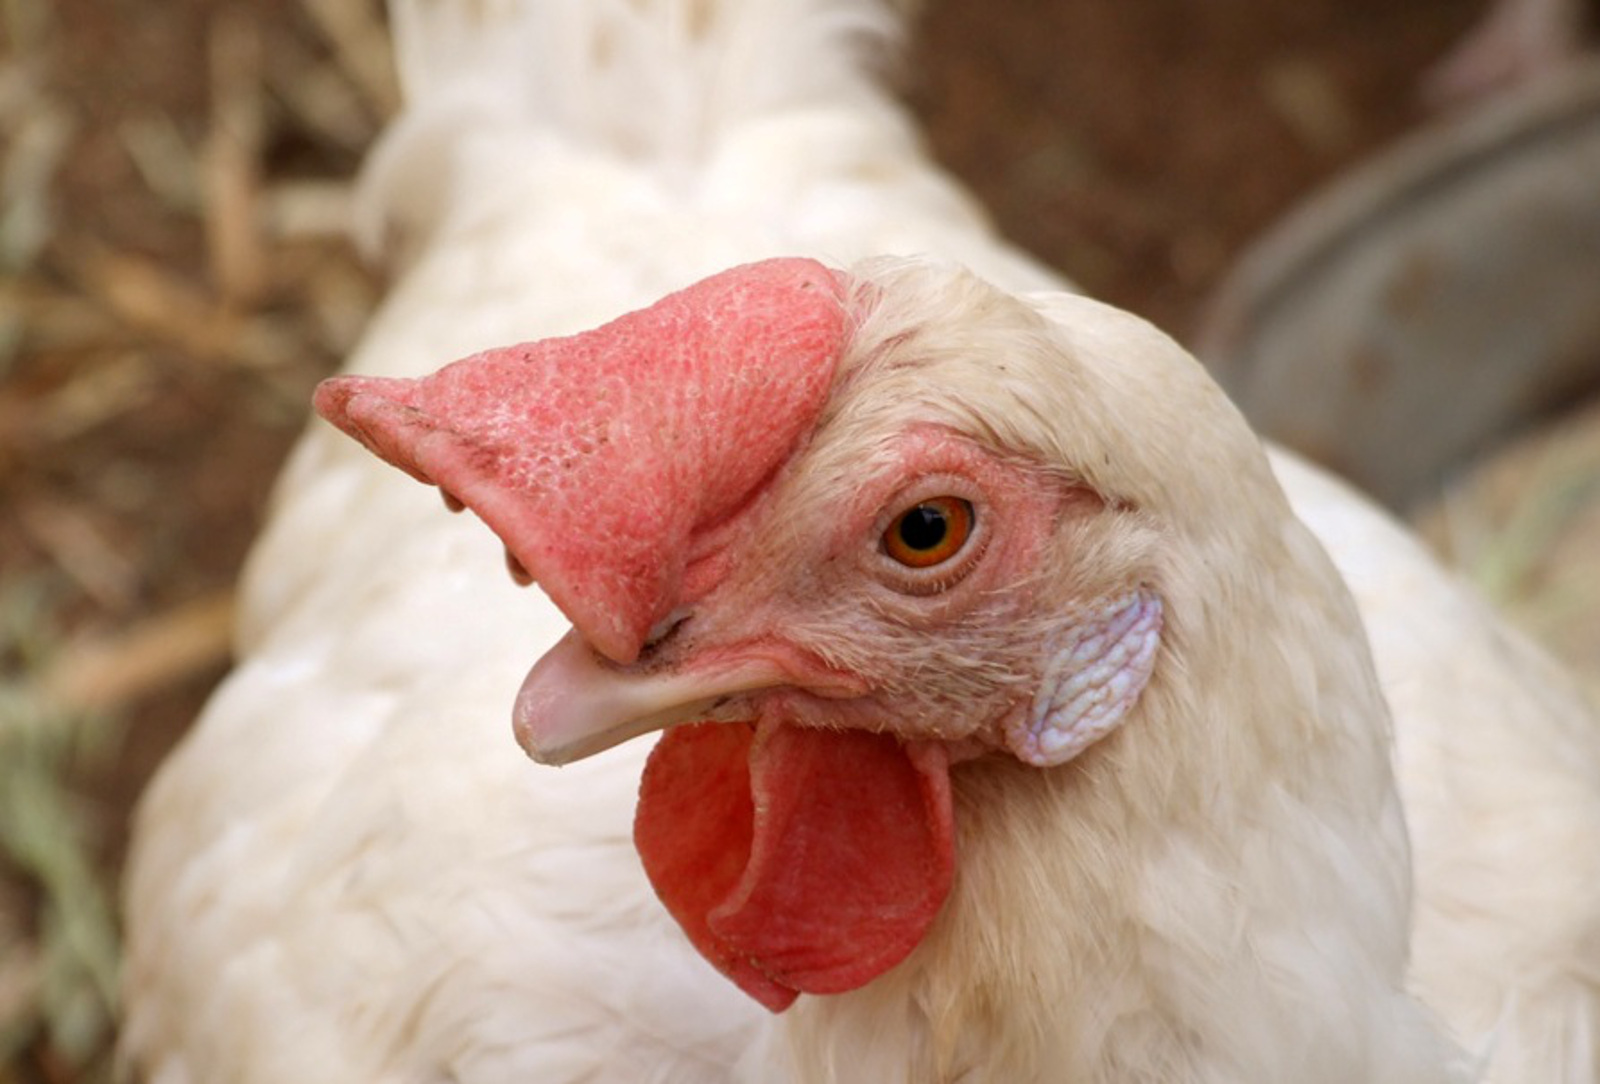 The Year of the Lawsuit: Defending Cruelty to Farms Animals